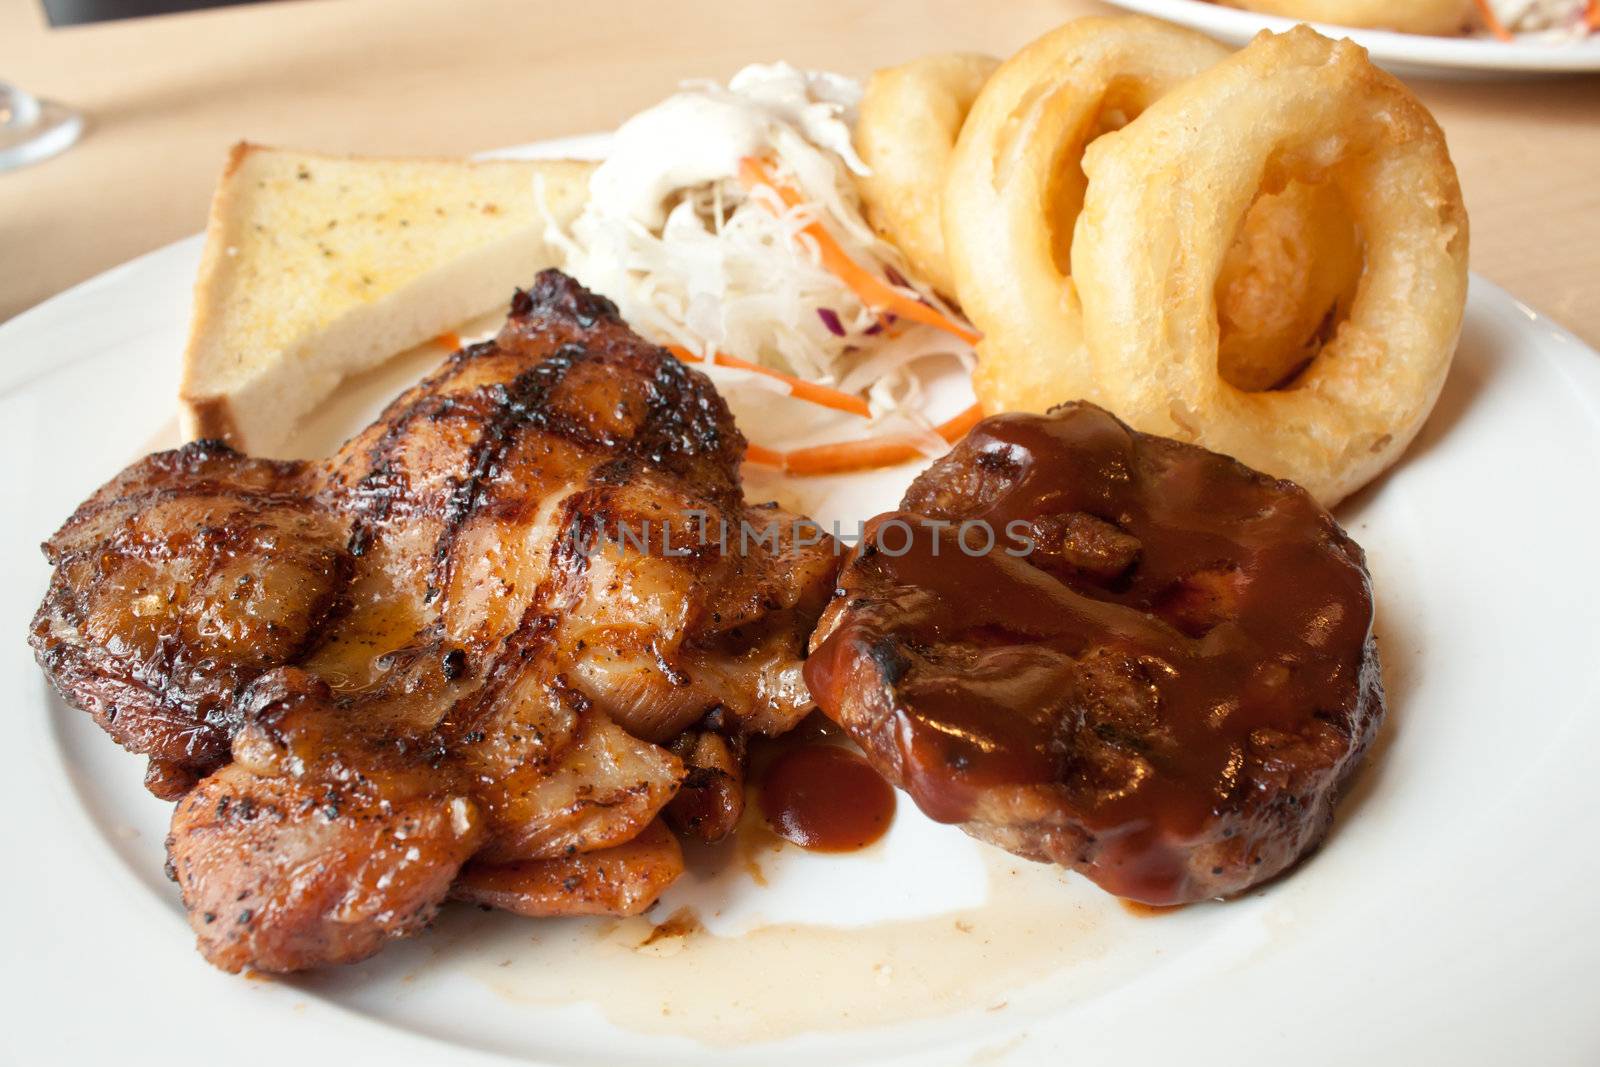 Chicken and pork steak in white plate with salad and fries onion ring